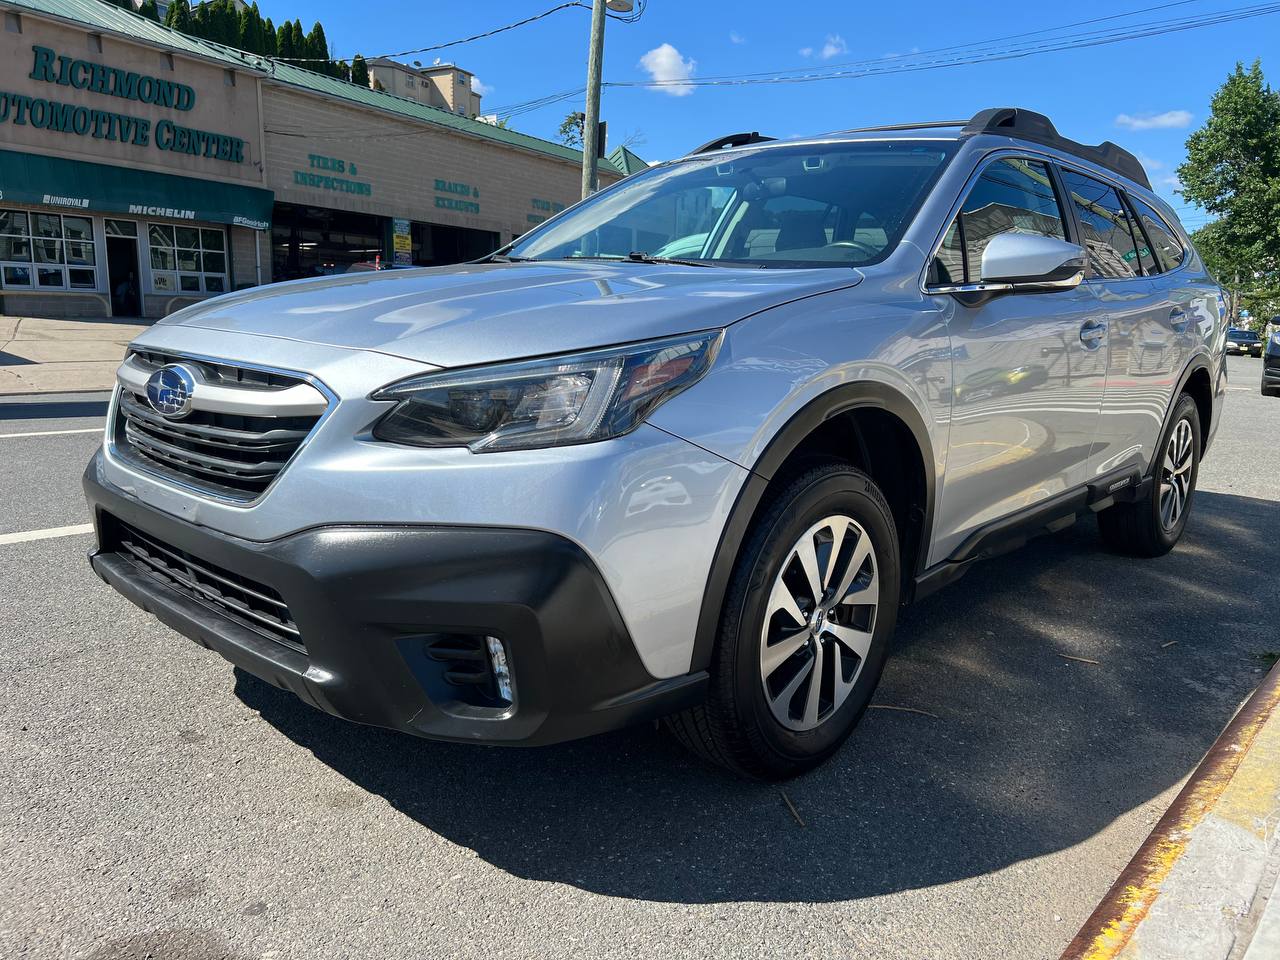 Used Car - 2020 Subaru Outback Premium AWD for Sale in Staten Island, NY